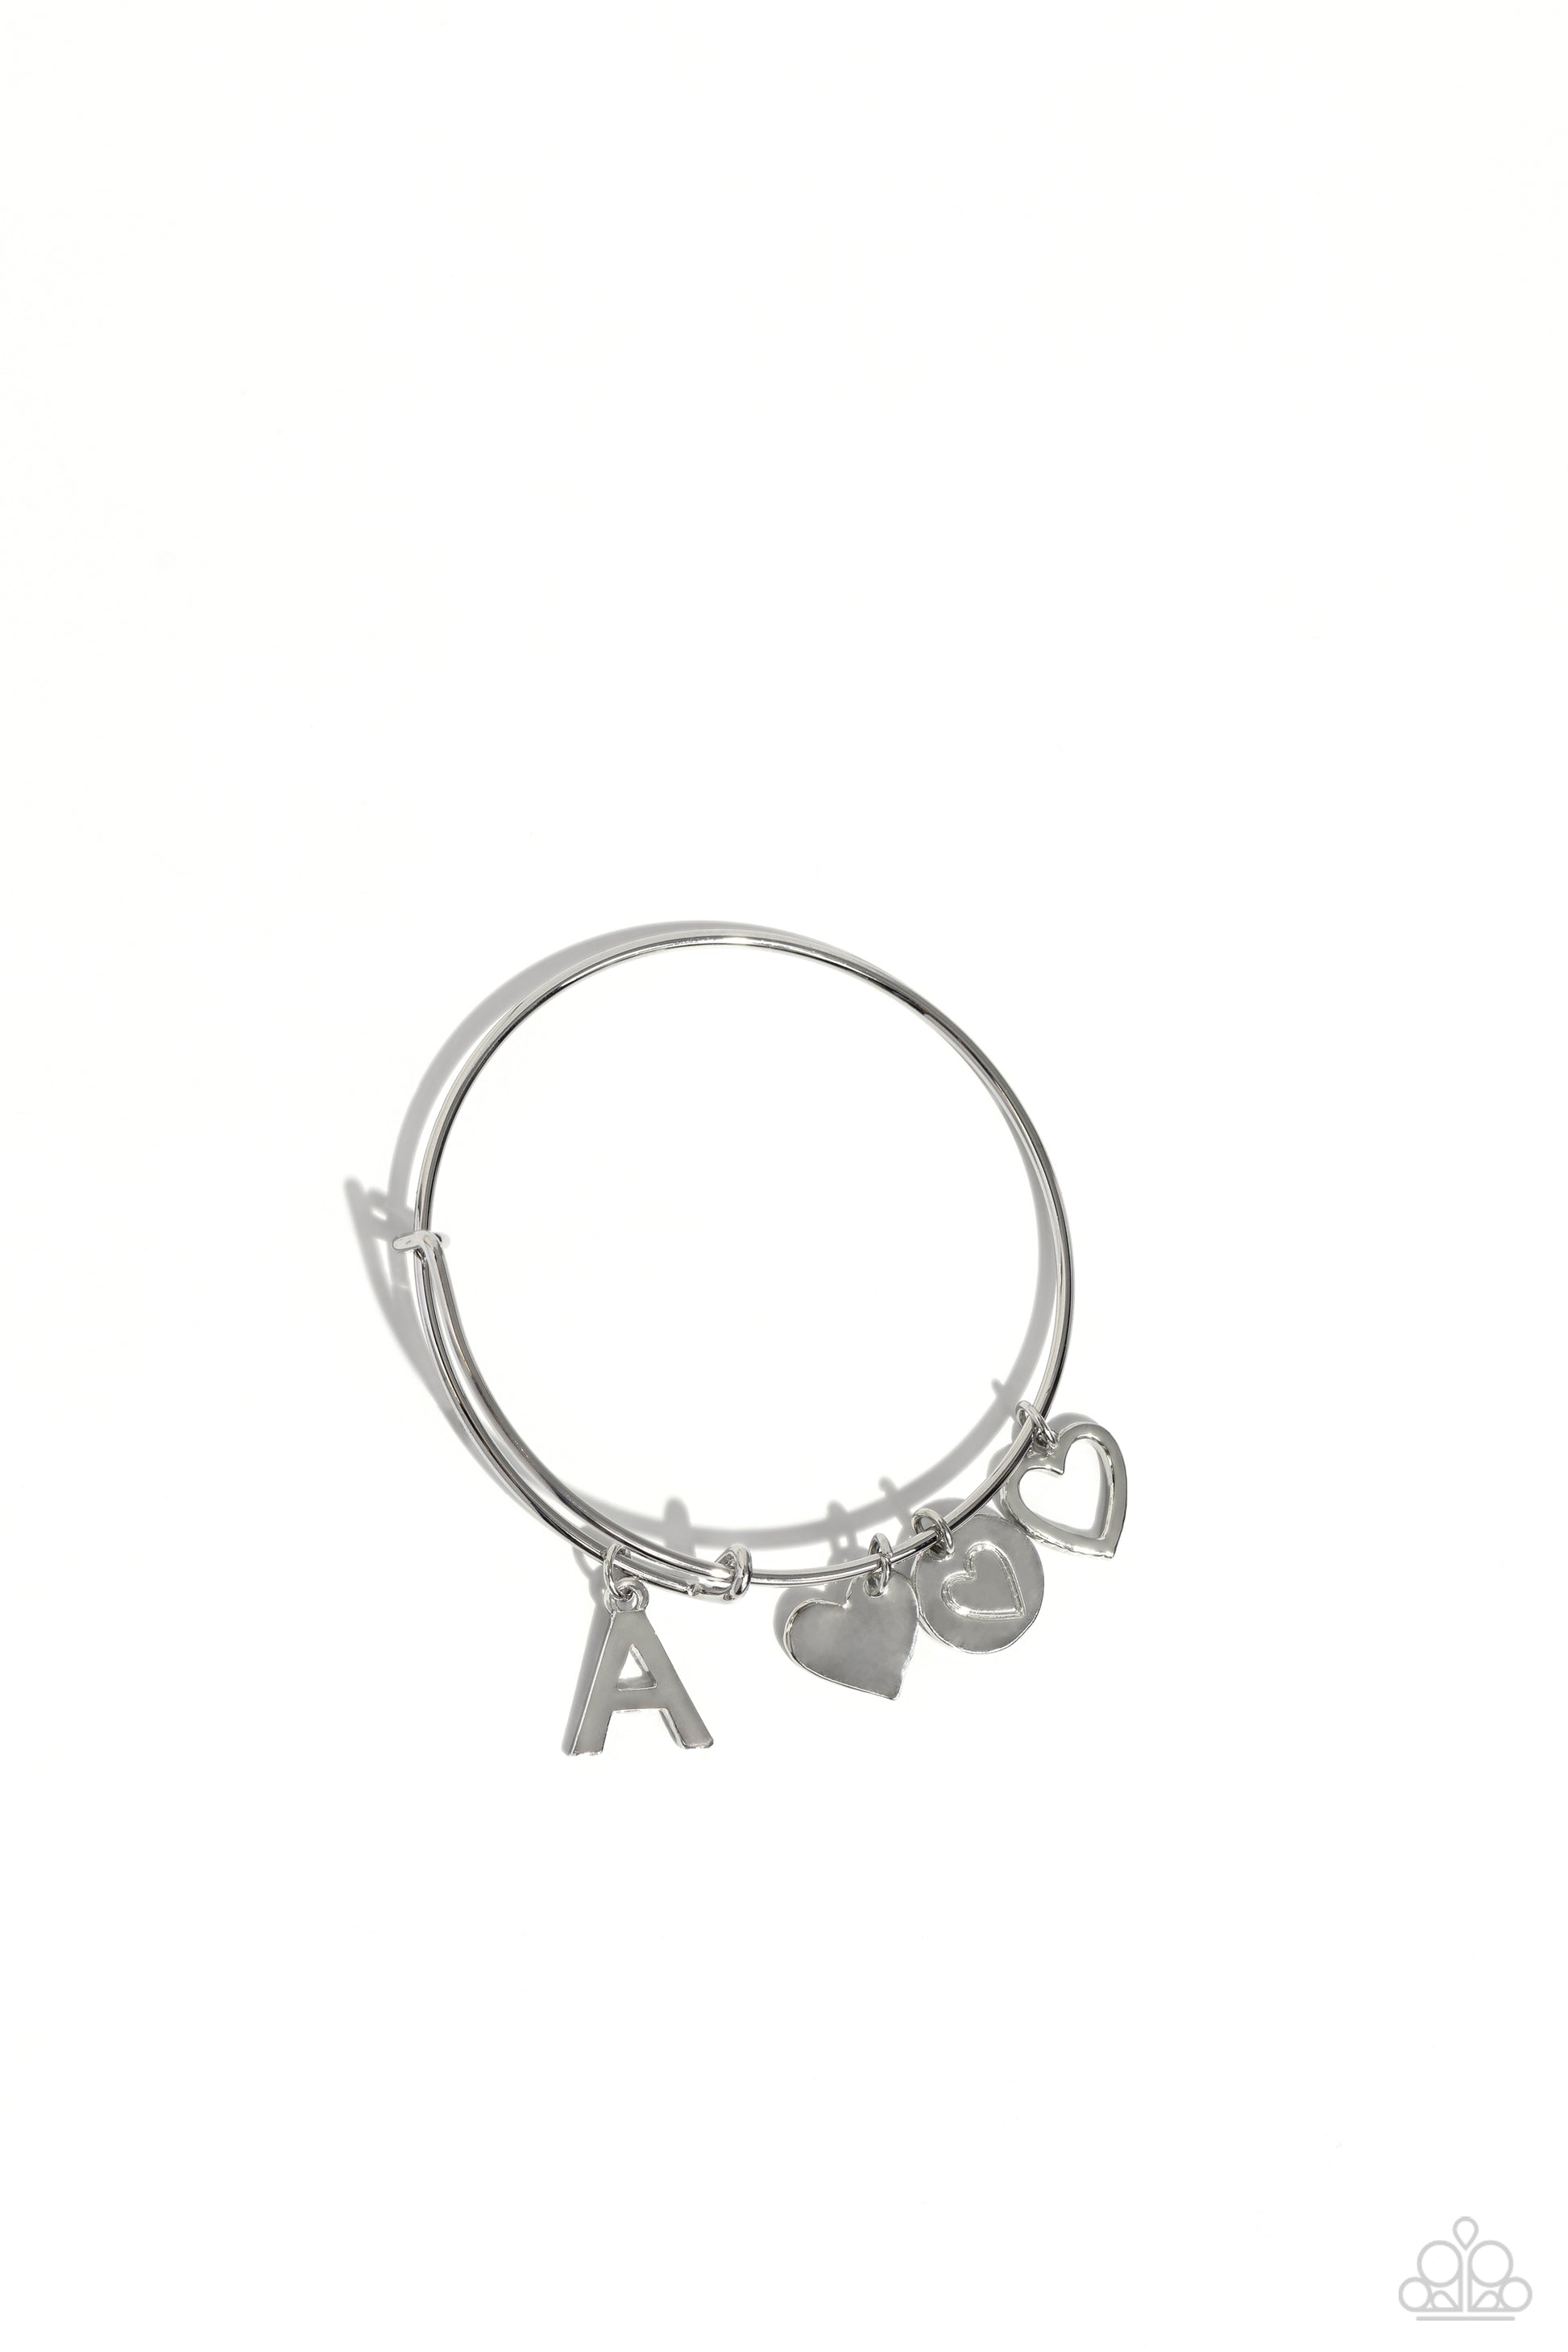 Making It INITIAL Silver "A" Bracelet - Paparazzi Accessories  Featuring shiny silver, airy, and stamped finishes, a mismatched collection of dainty heart charms, and the letter "A" glides along a silver bar fitting at the center of the wrist for a romantic, sentimental flair.  Sold as one individual bracelet.  SKU: P9BA-SVXX-185XX